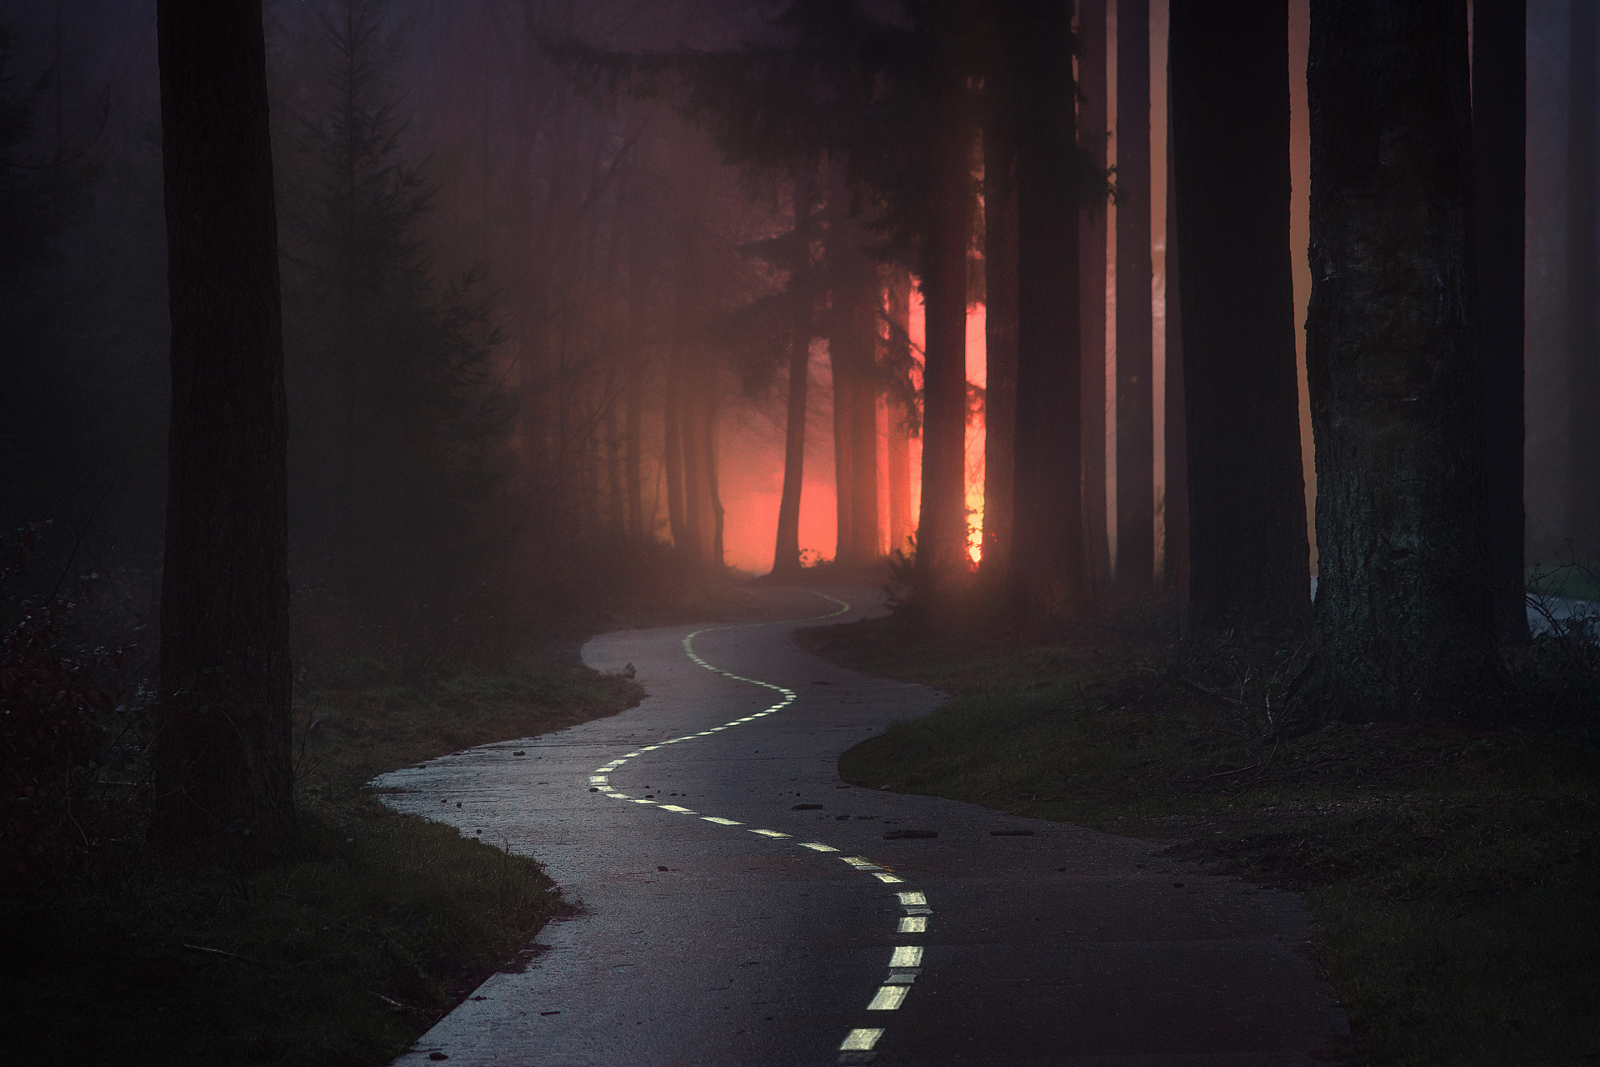 Turn Around: The Making of this Mysterious Misty Photo